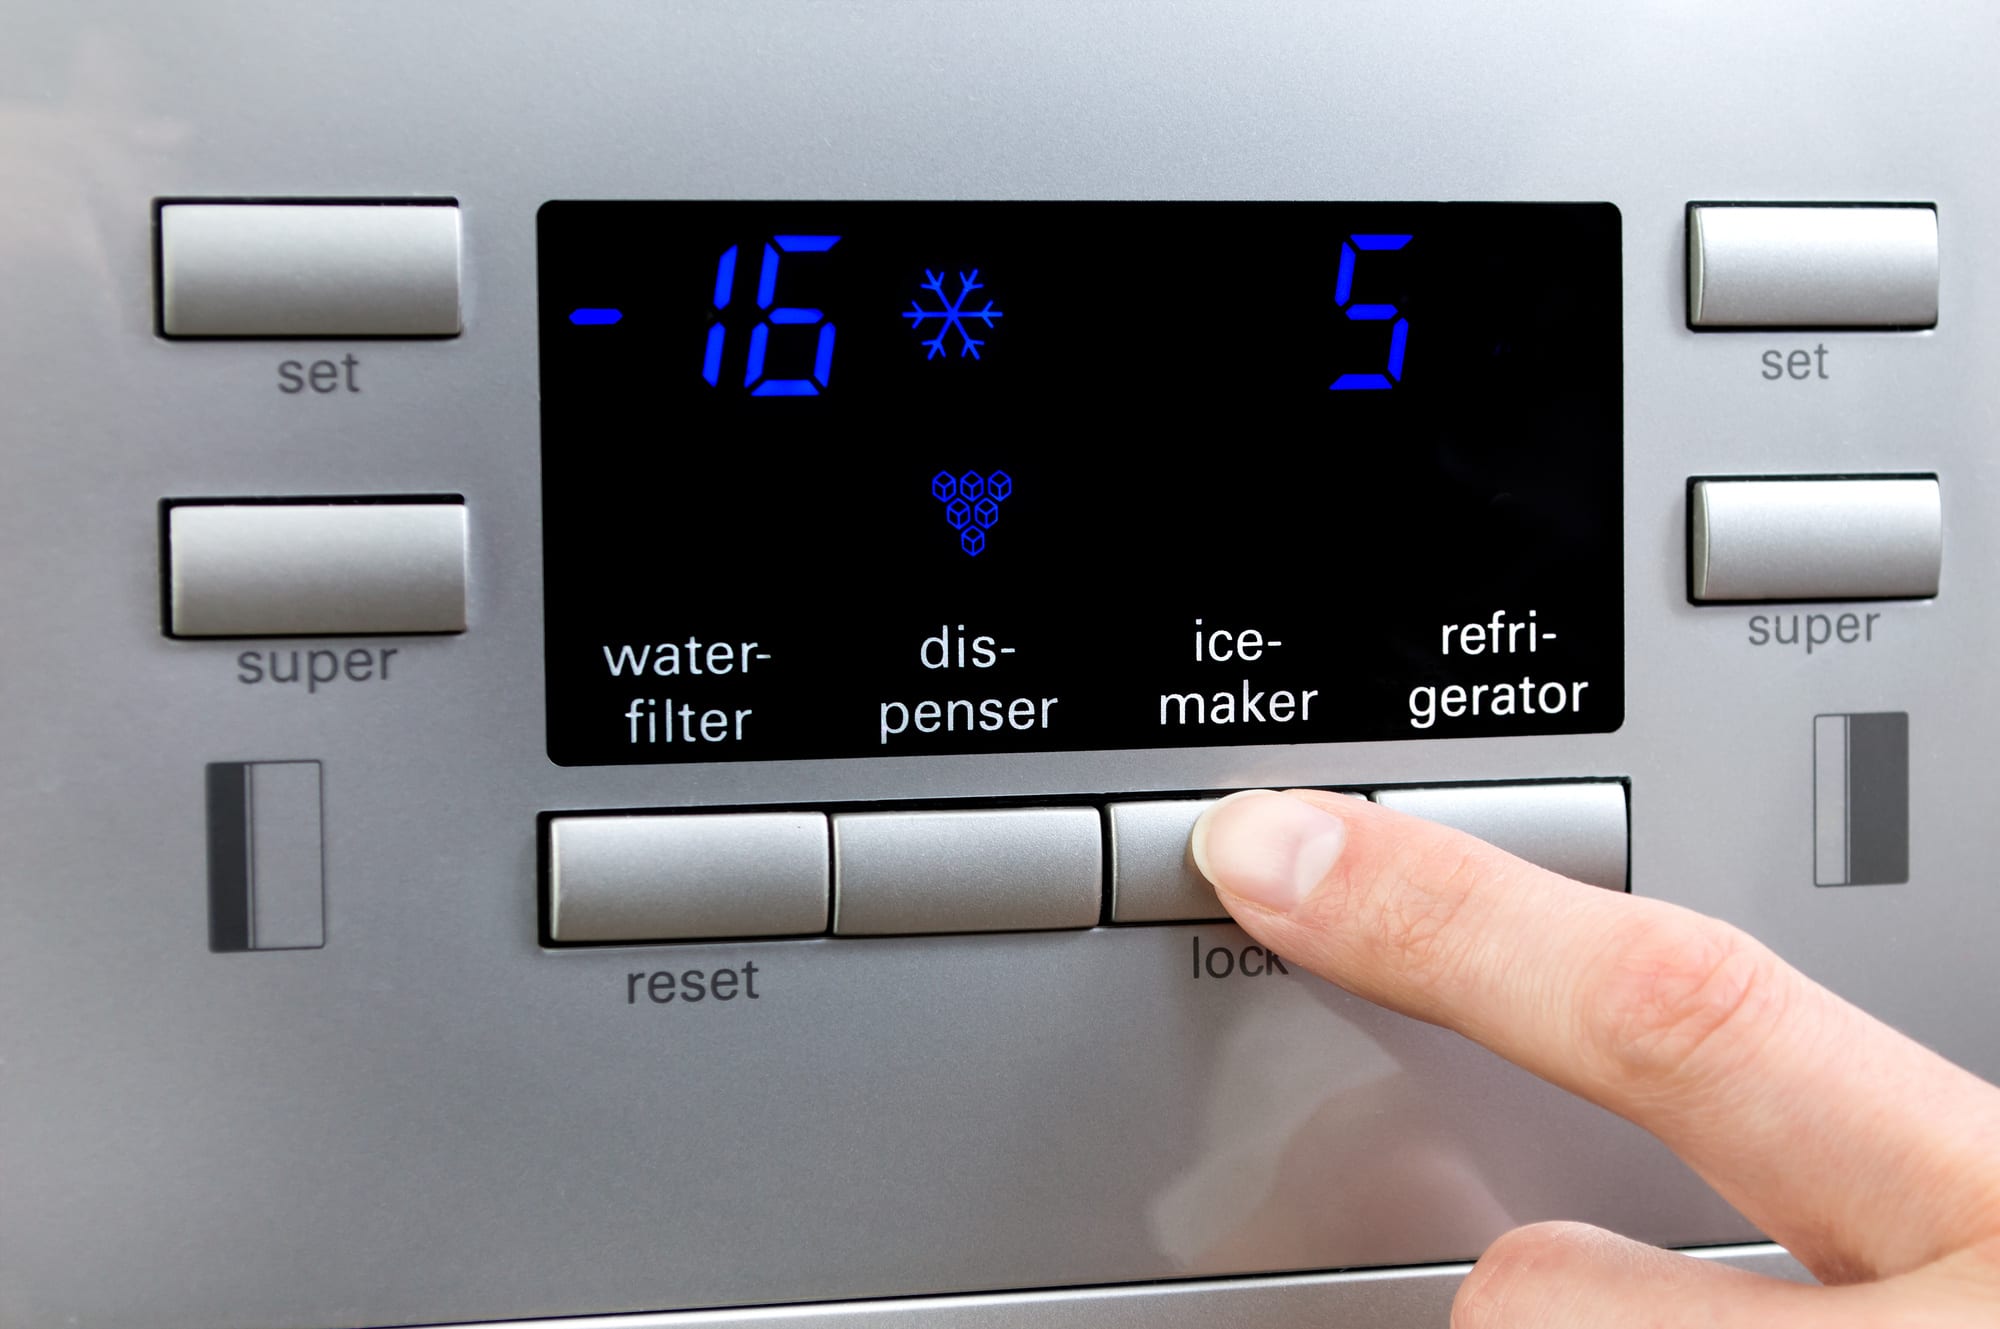 How To Reset Water Filter Light On Whirlpool Refrigerator